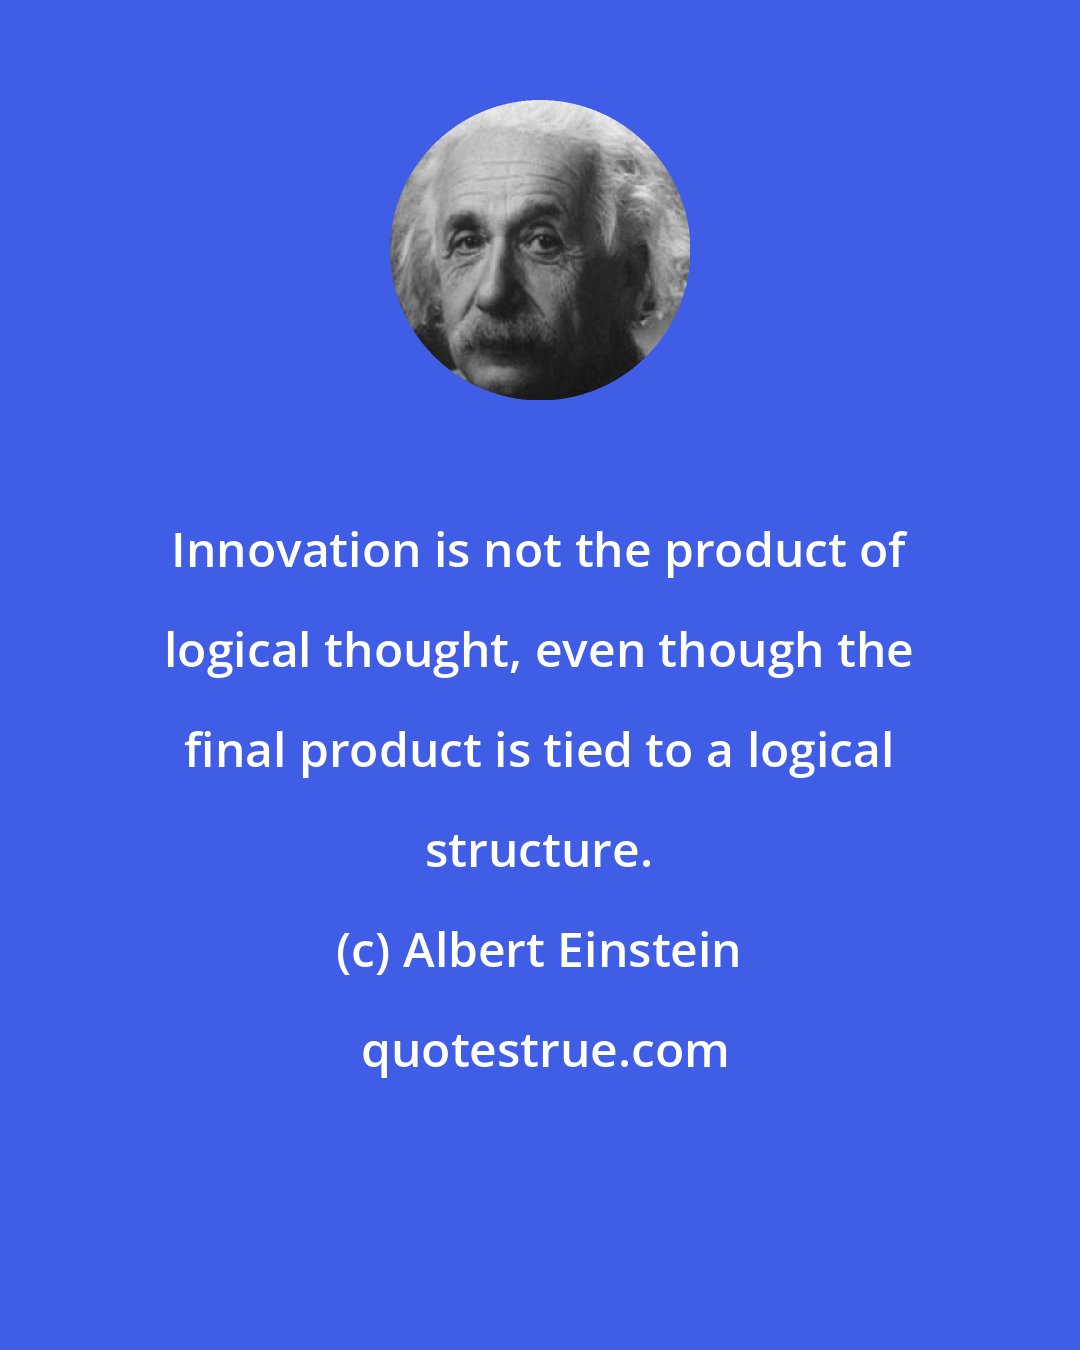 Albert Einstein: Innovation is not the product of logical thought, even though the final product is tied to a logical structure.